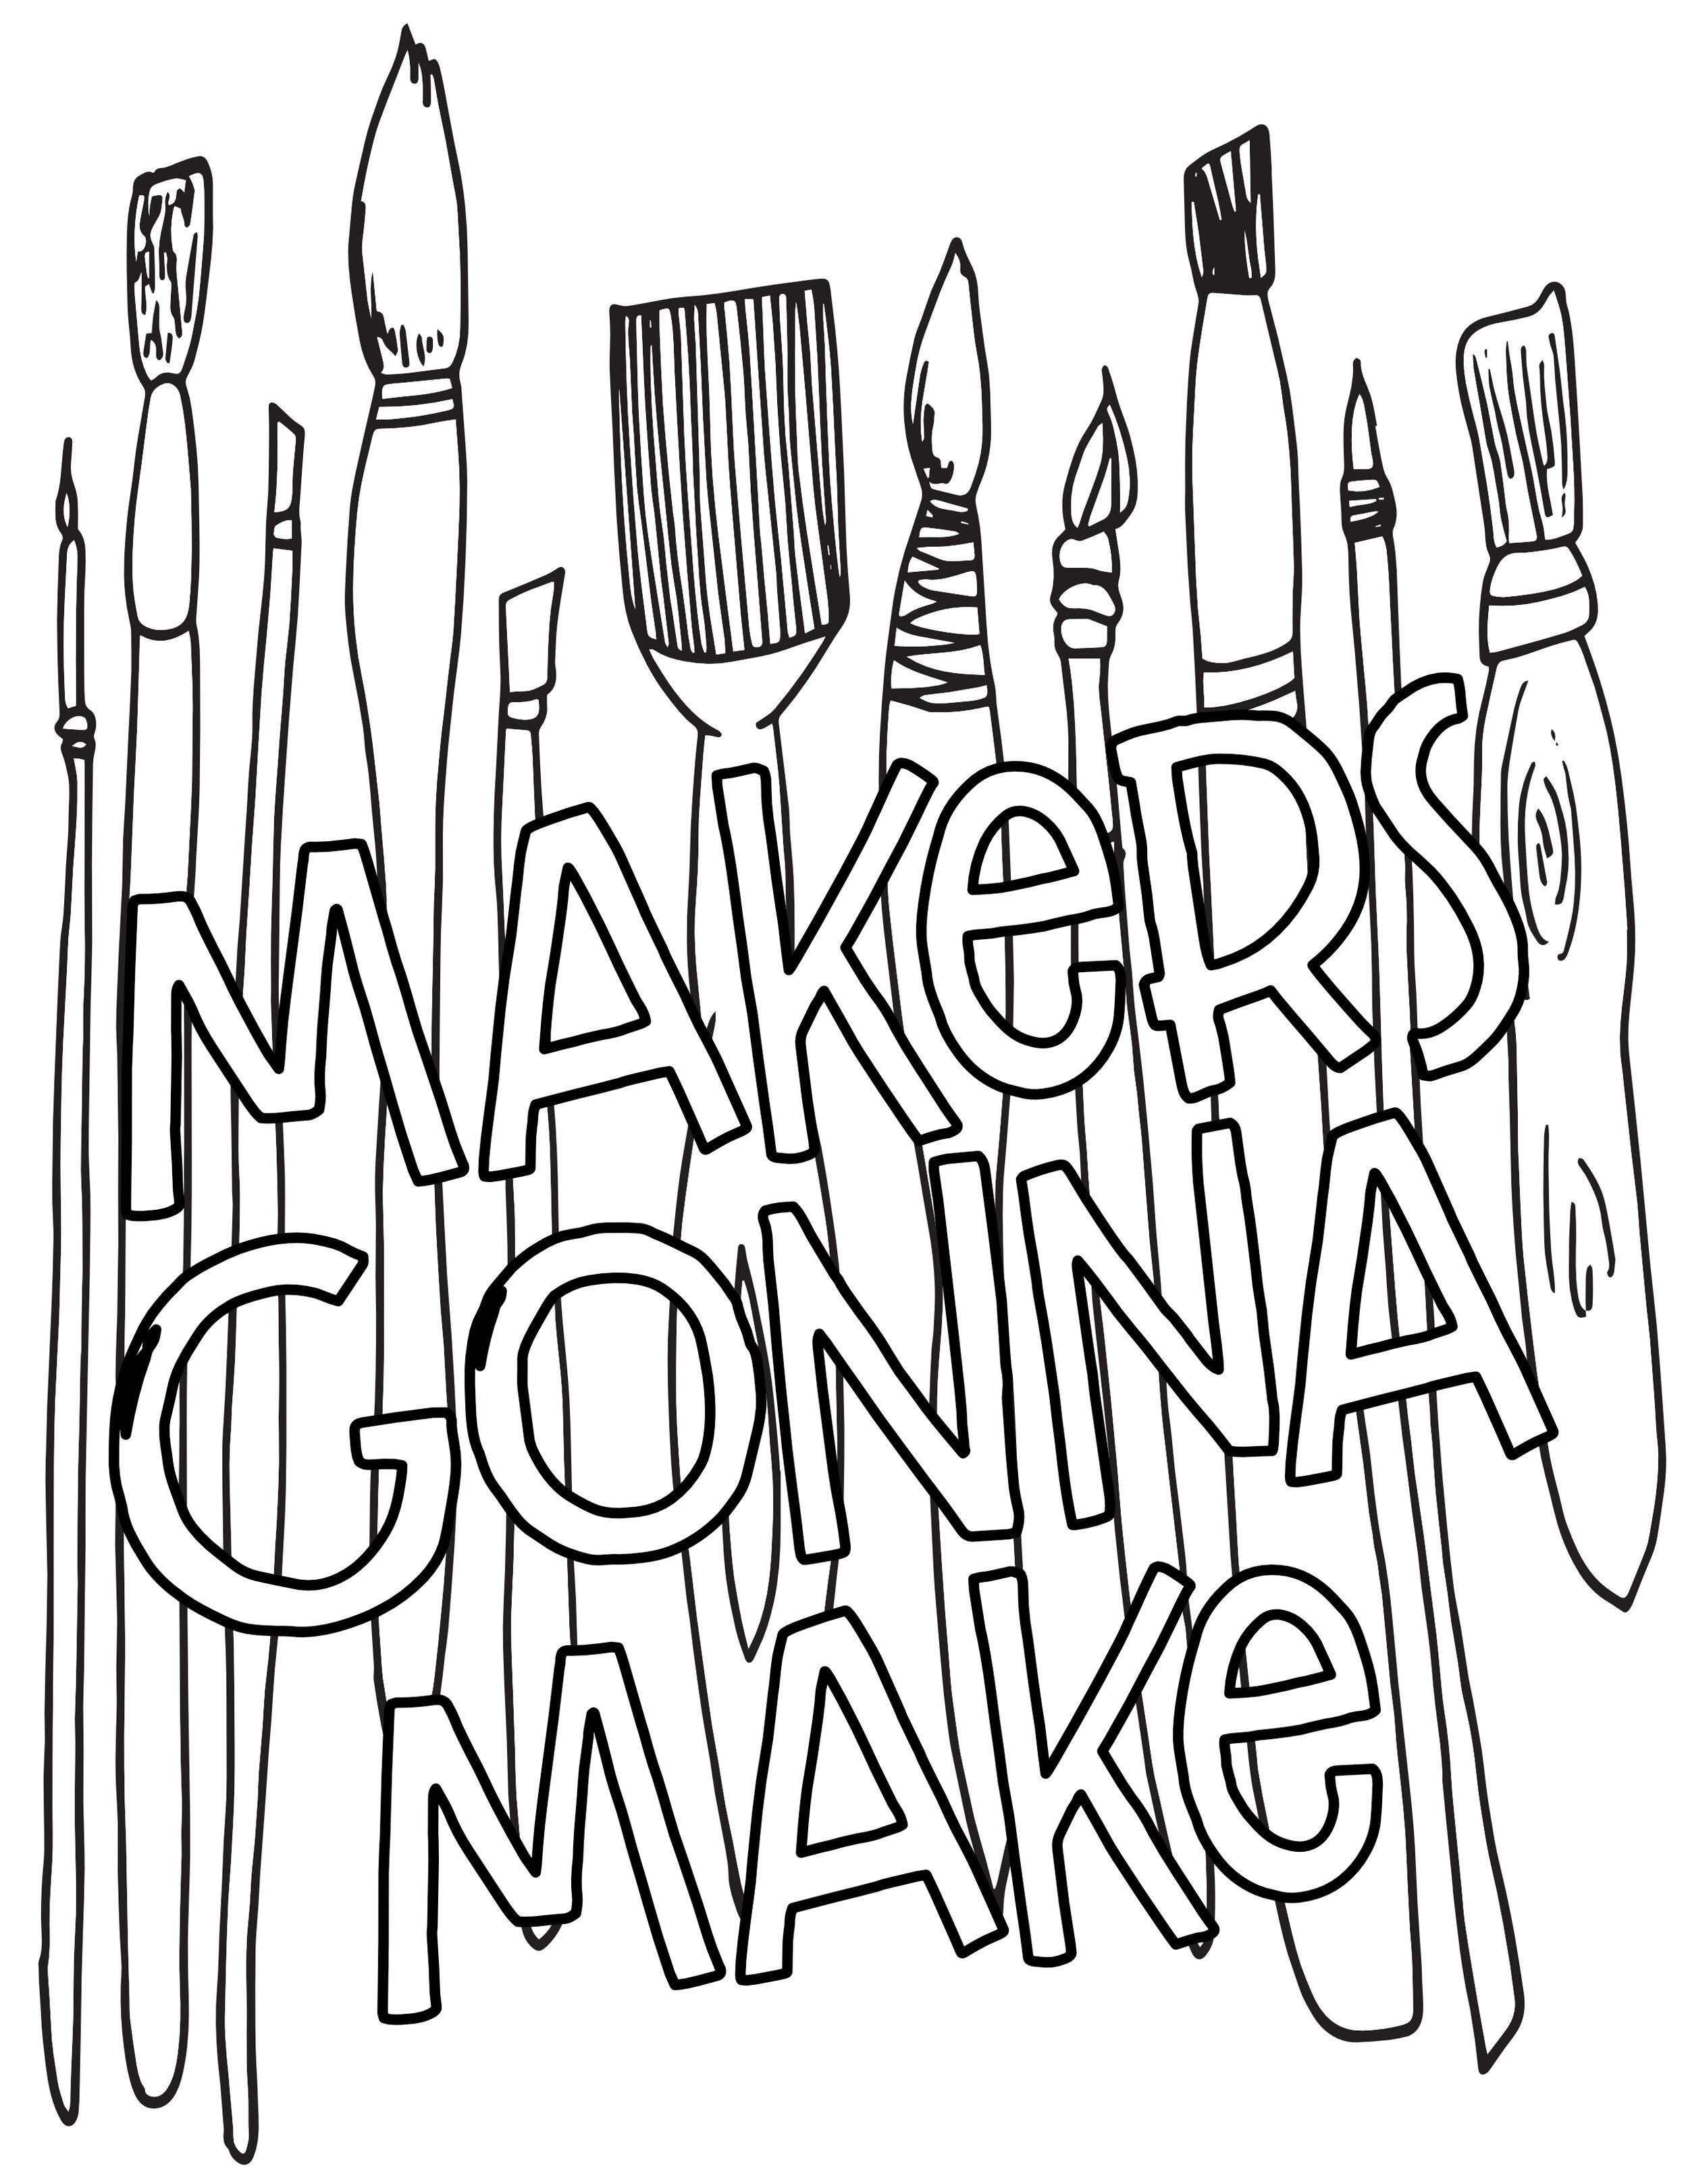 MAKERS GONNA MAKE - Free Coloring Page — Stevie Doodles